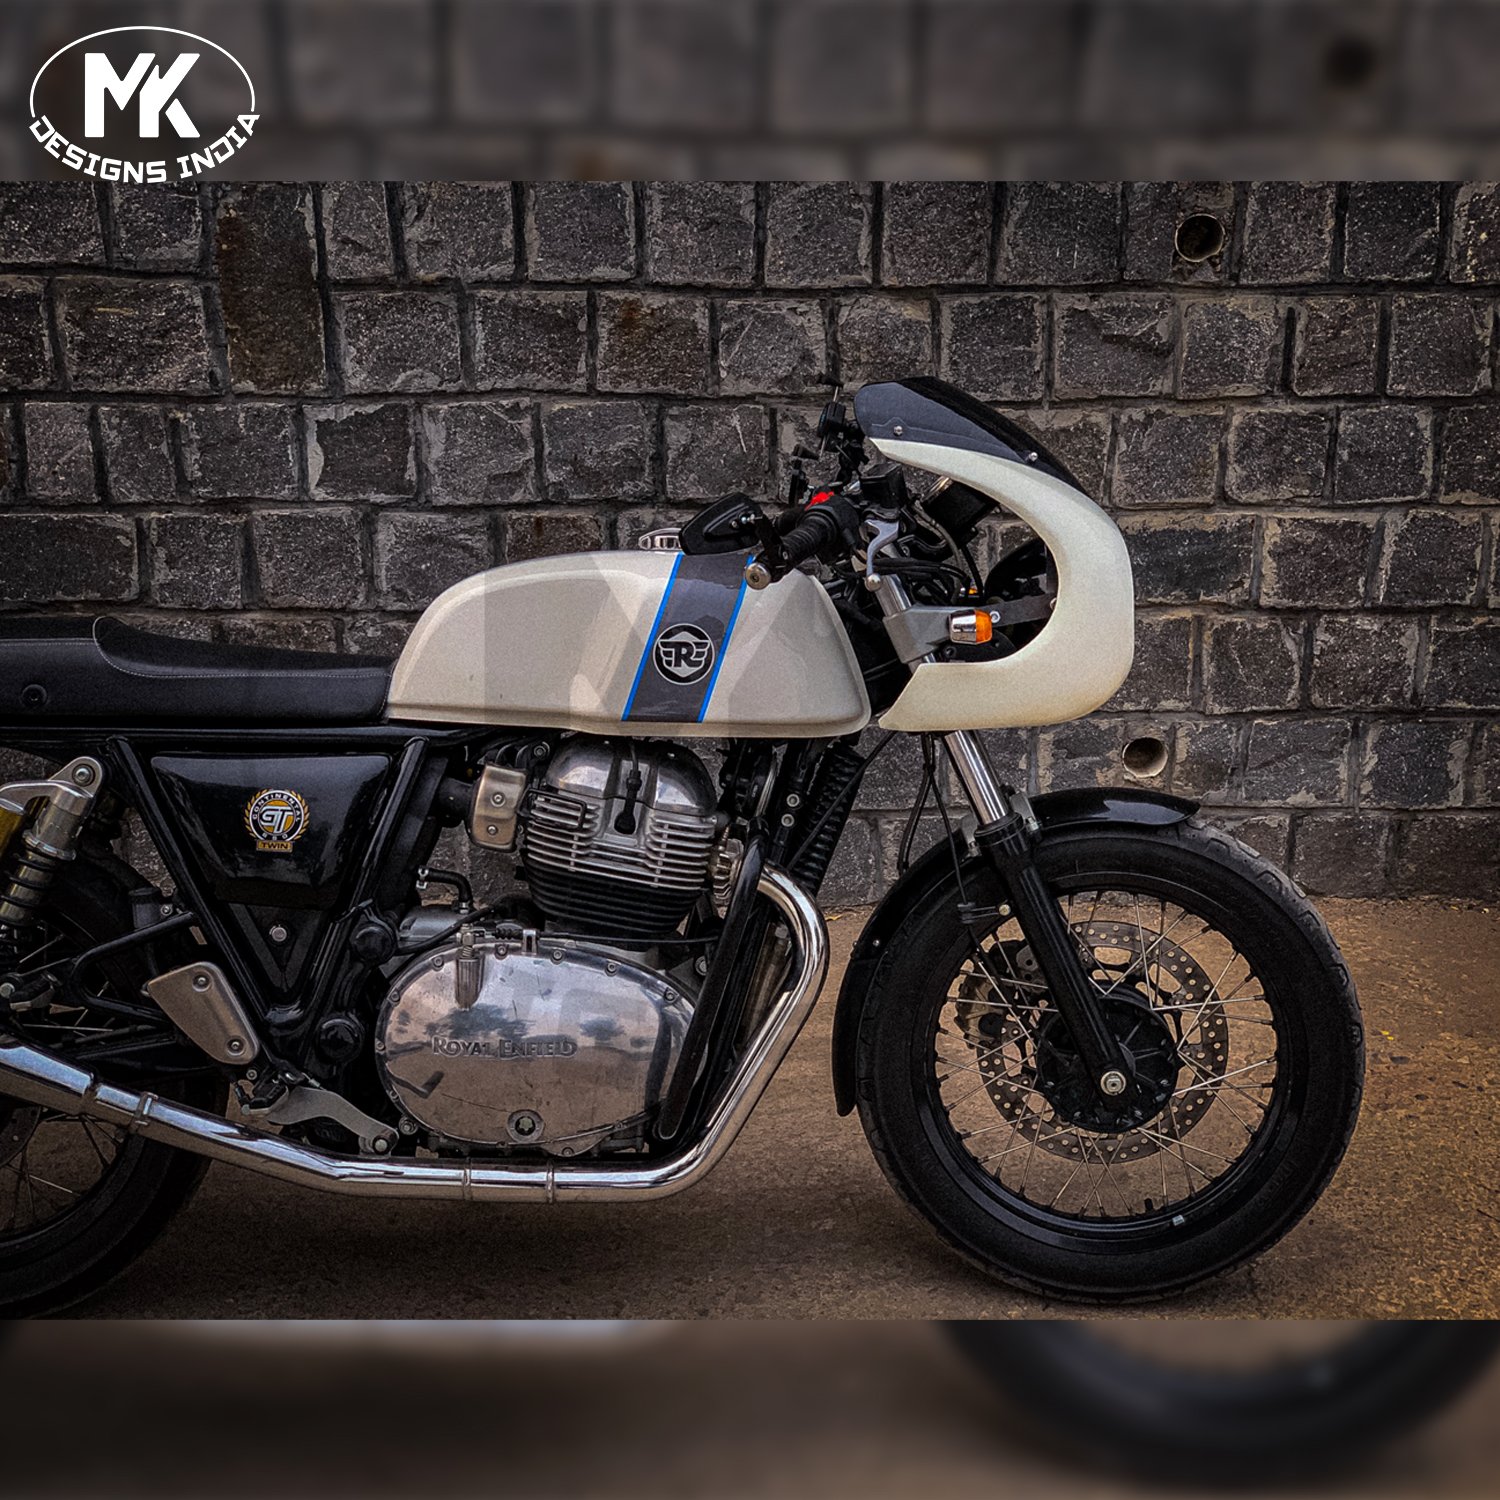 Caferacer Fairing For Continental Gt Mk Designs India